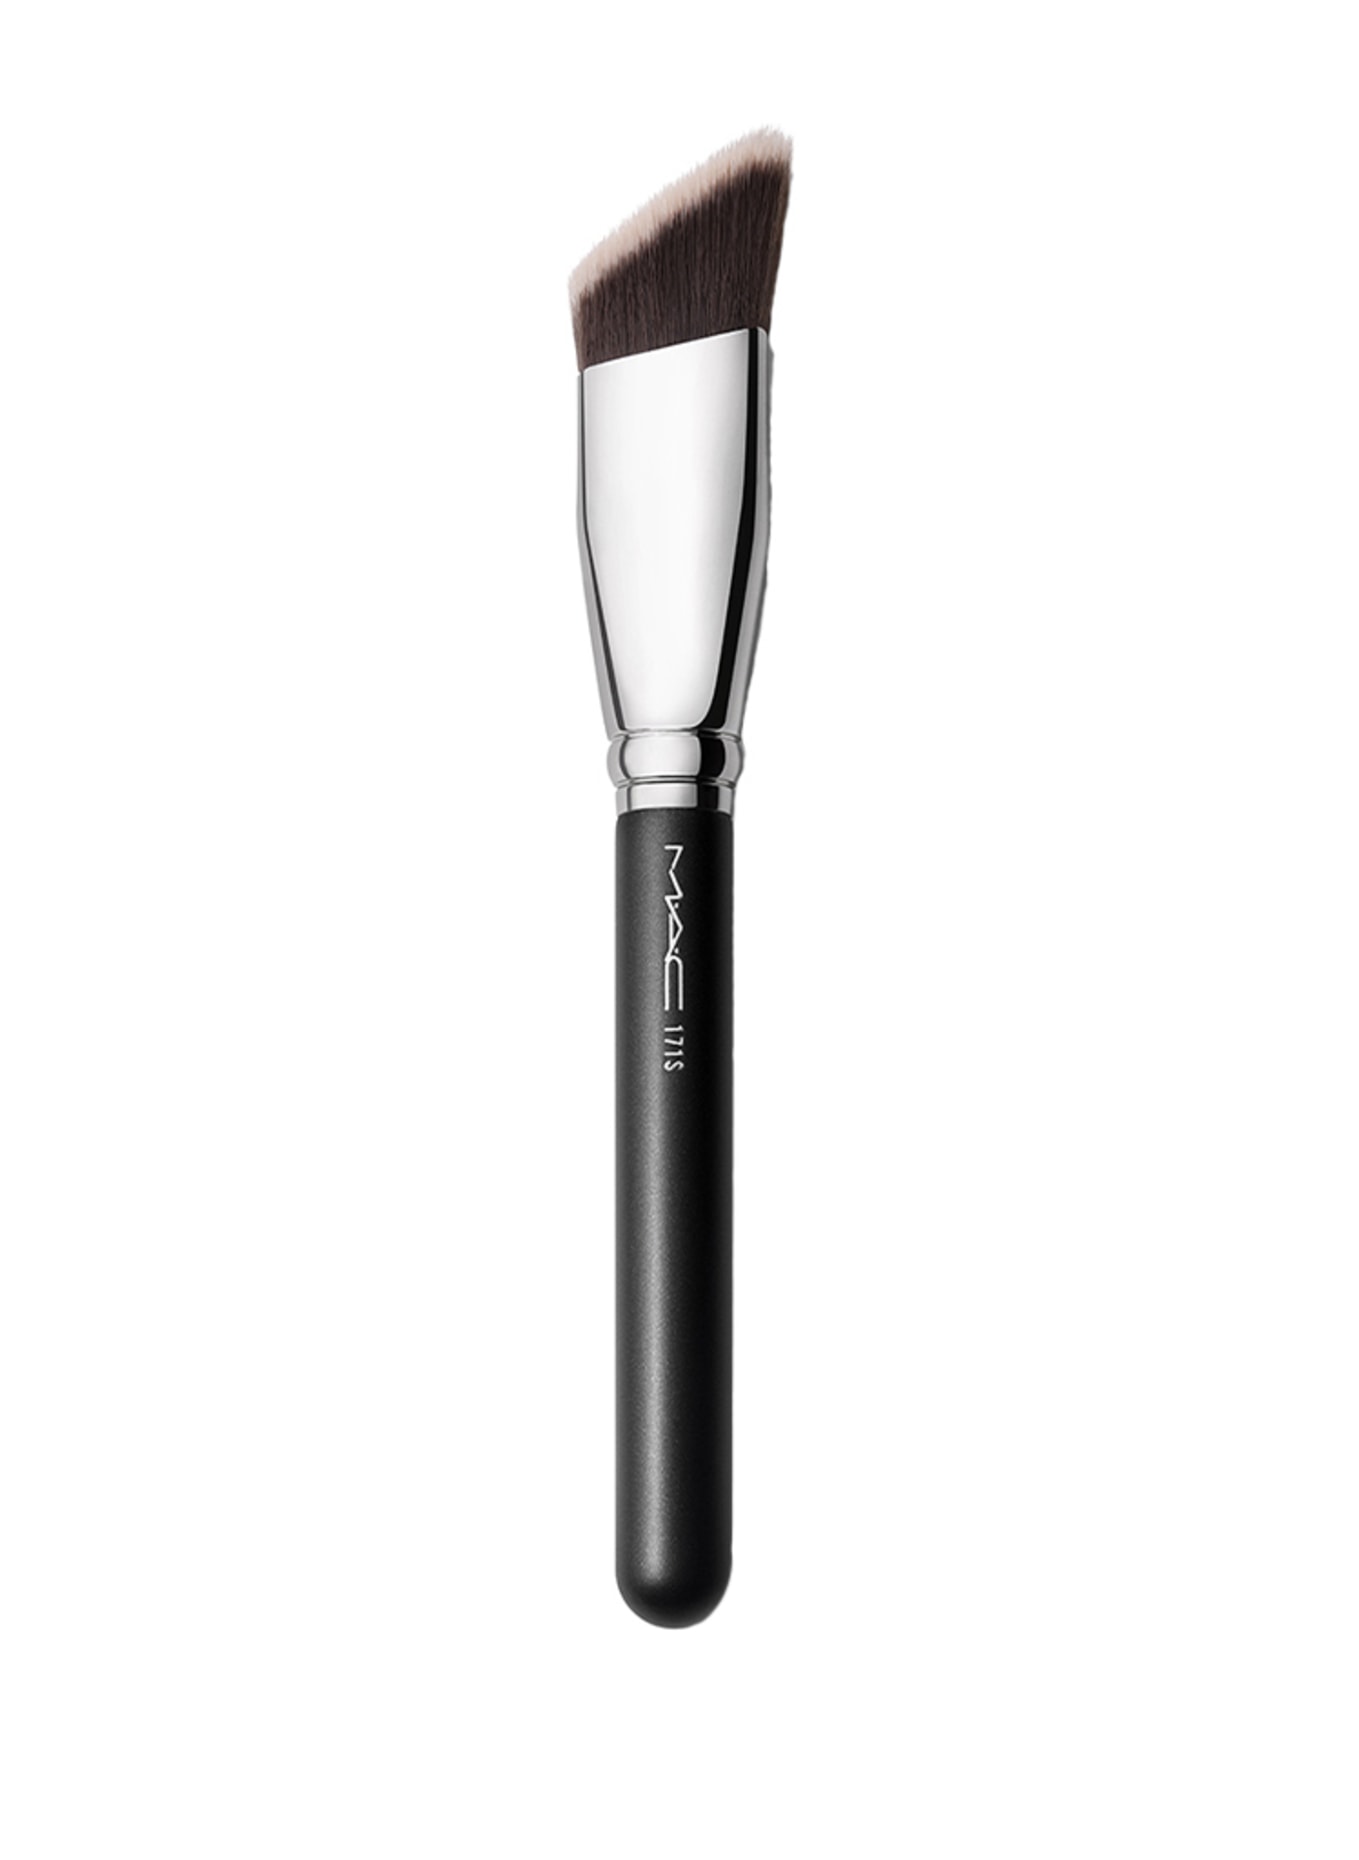 M.A.C SMOOTHE EDGE ALL OVER FACE BRUSH (Bild 1)